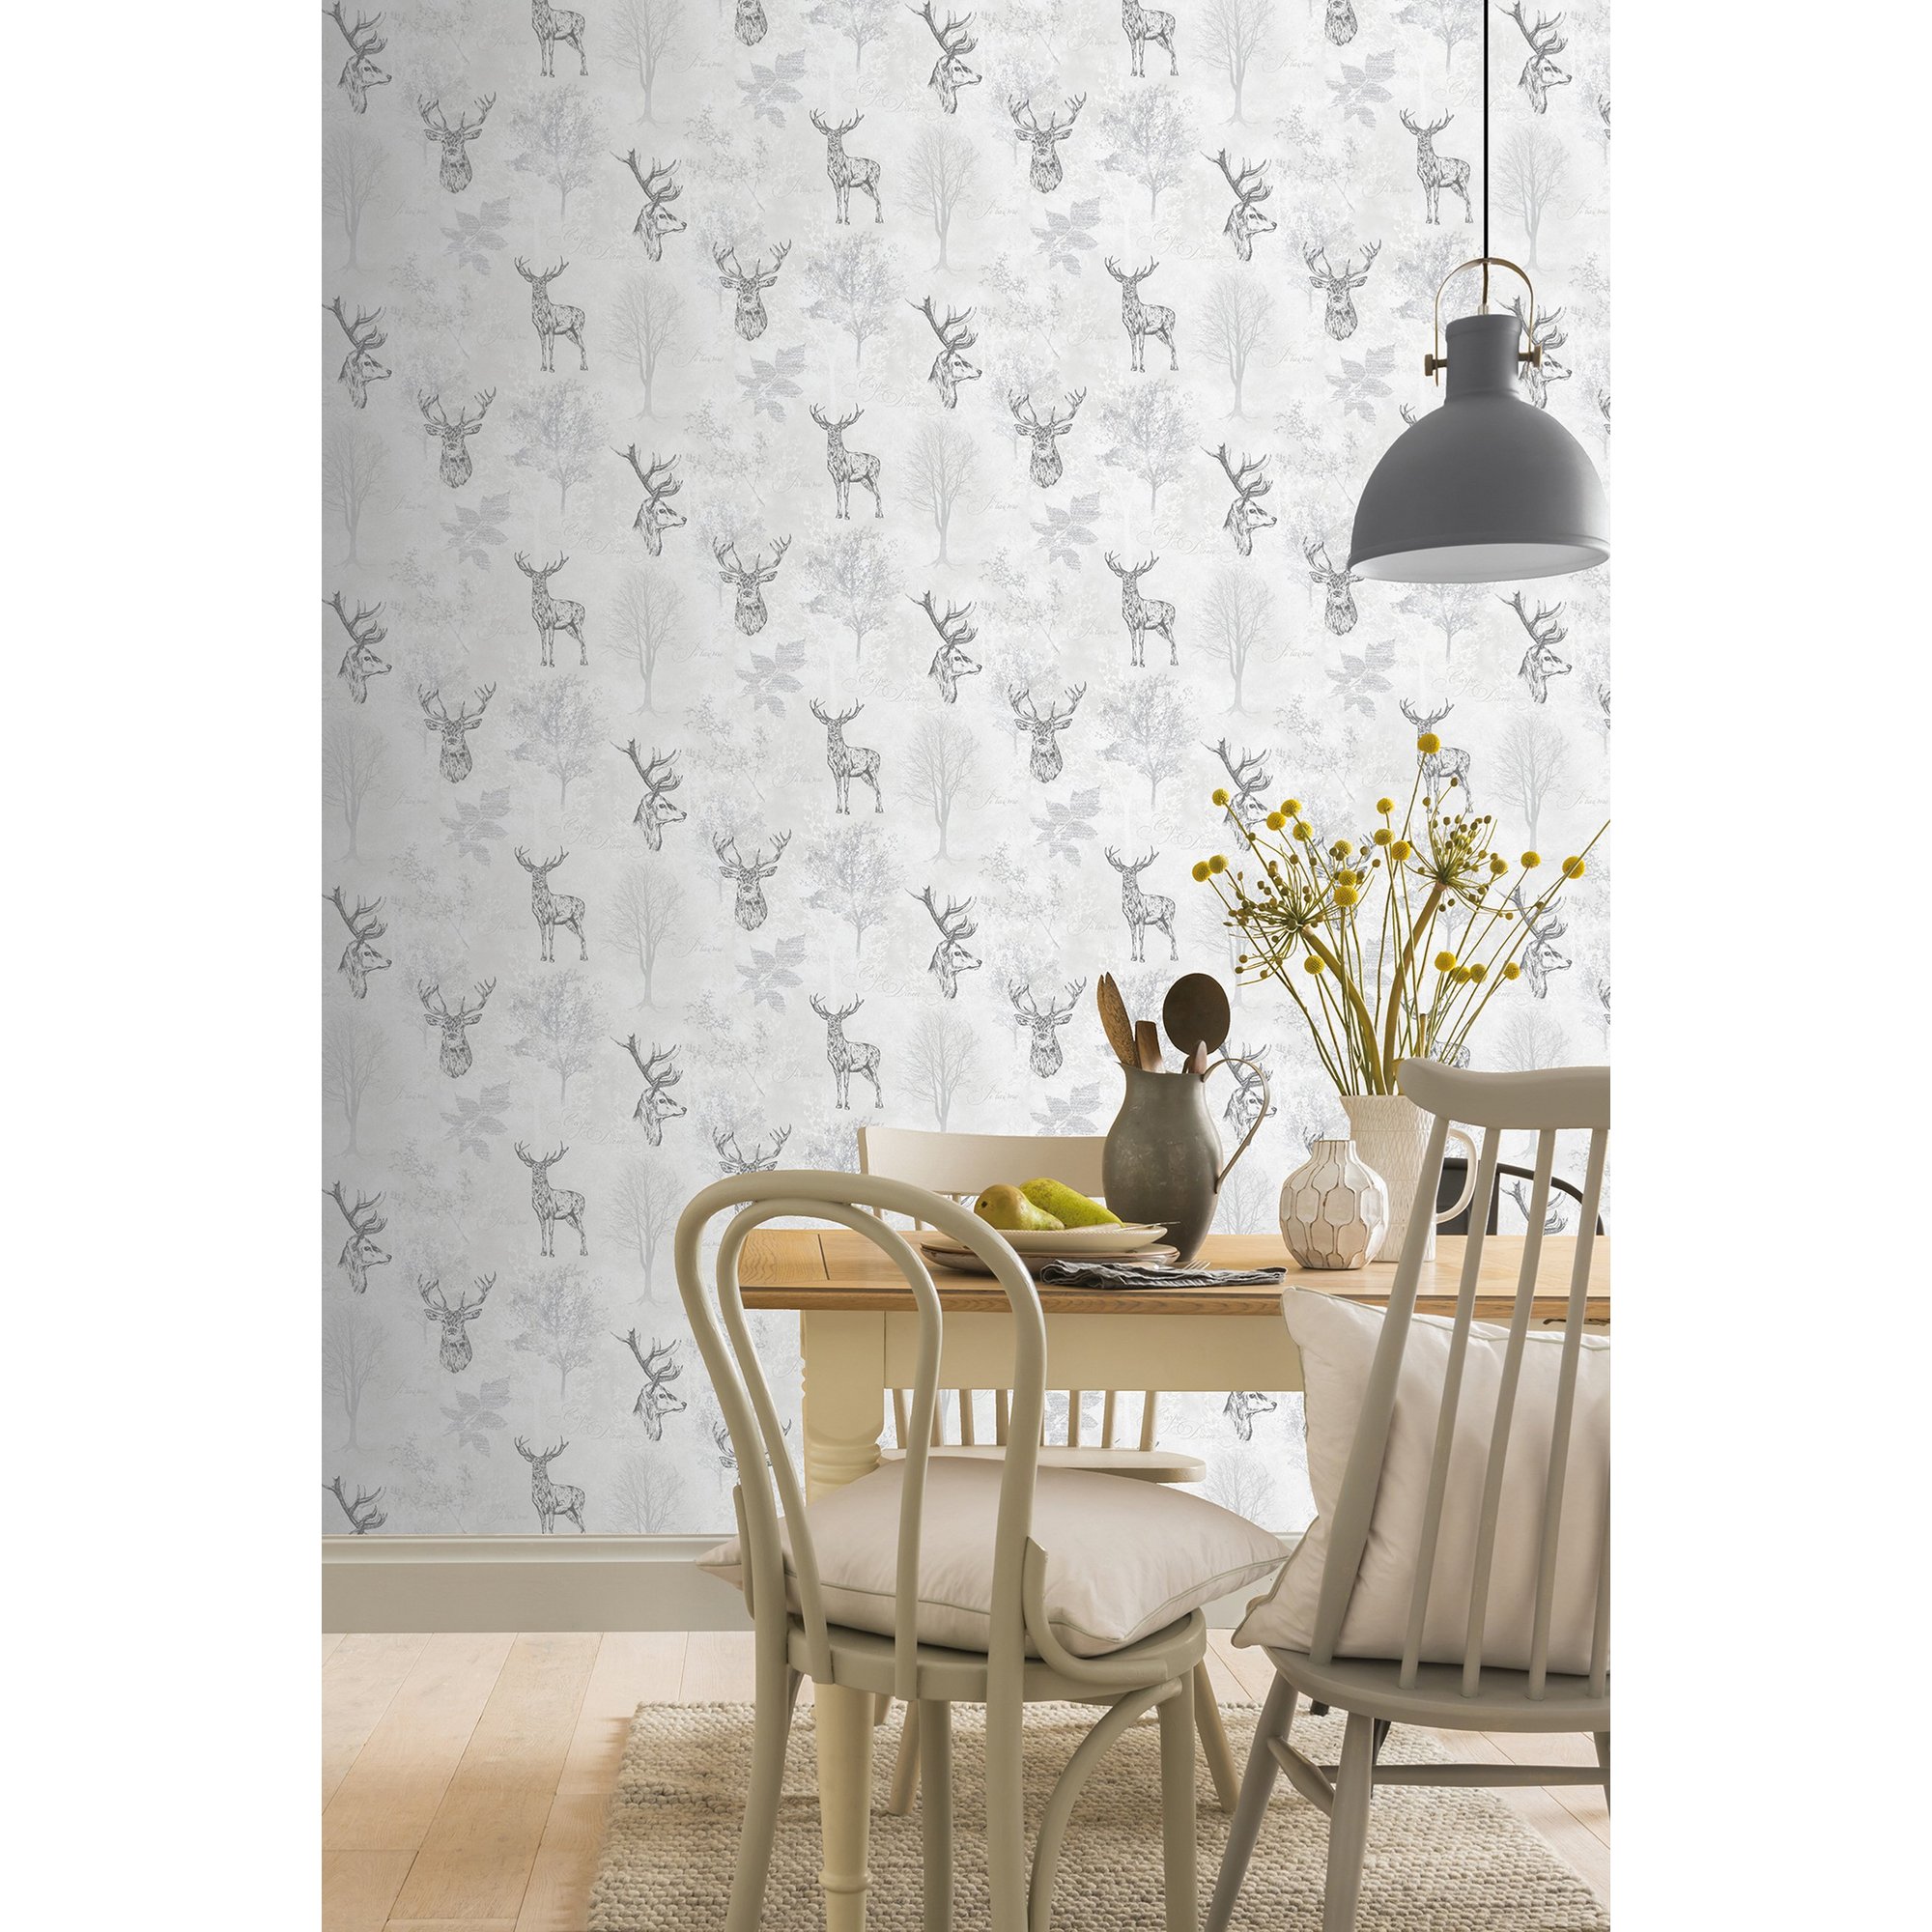 Image of Arthouse Etched Stag Wallpaper